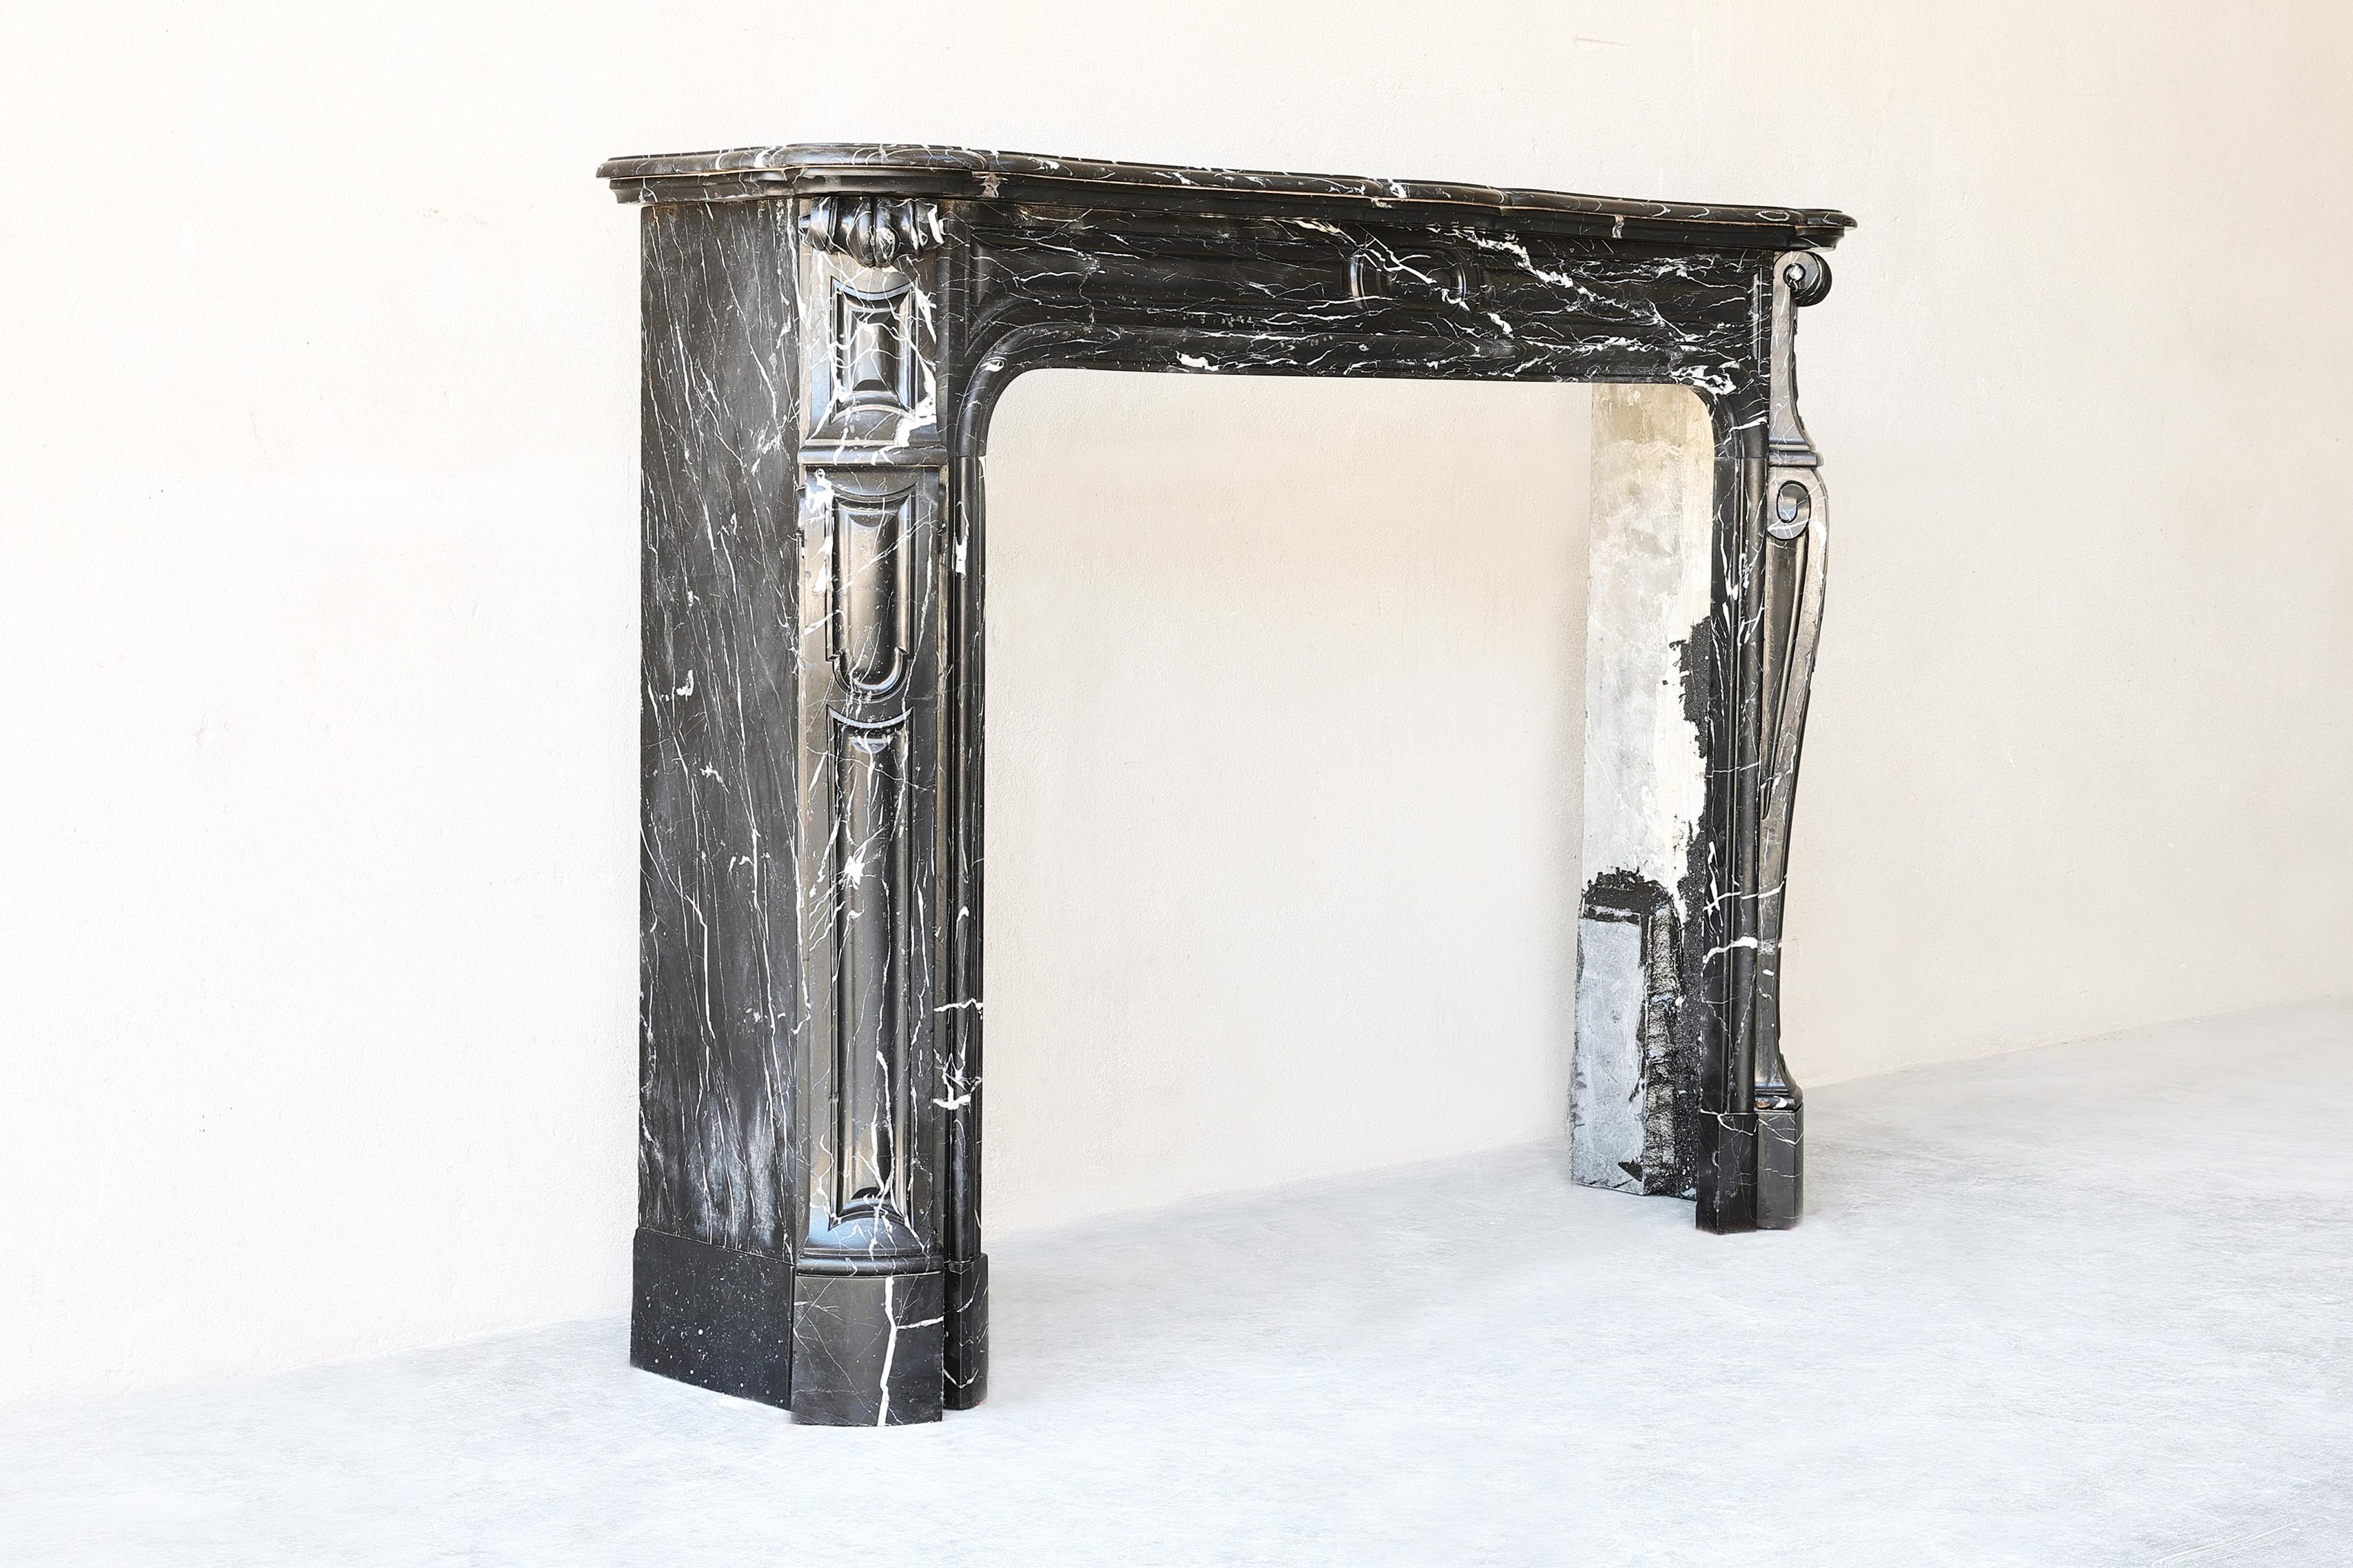 This 19th Century antique Pompadour fireplace, sculpted from Black Marquina marble, is a breathtaking masterpiece. This elegant relic boasts exquisite veining in shades of white and gray, which gracefully traverse the deep black backdrop. Its